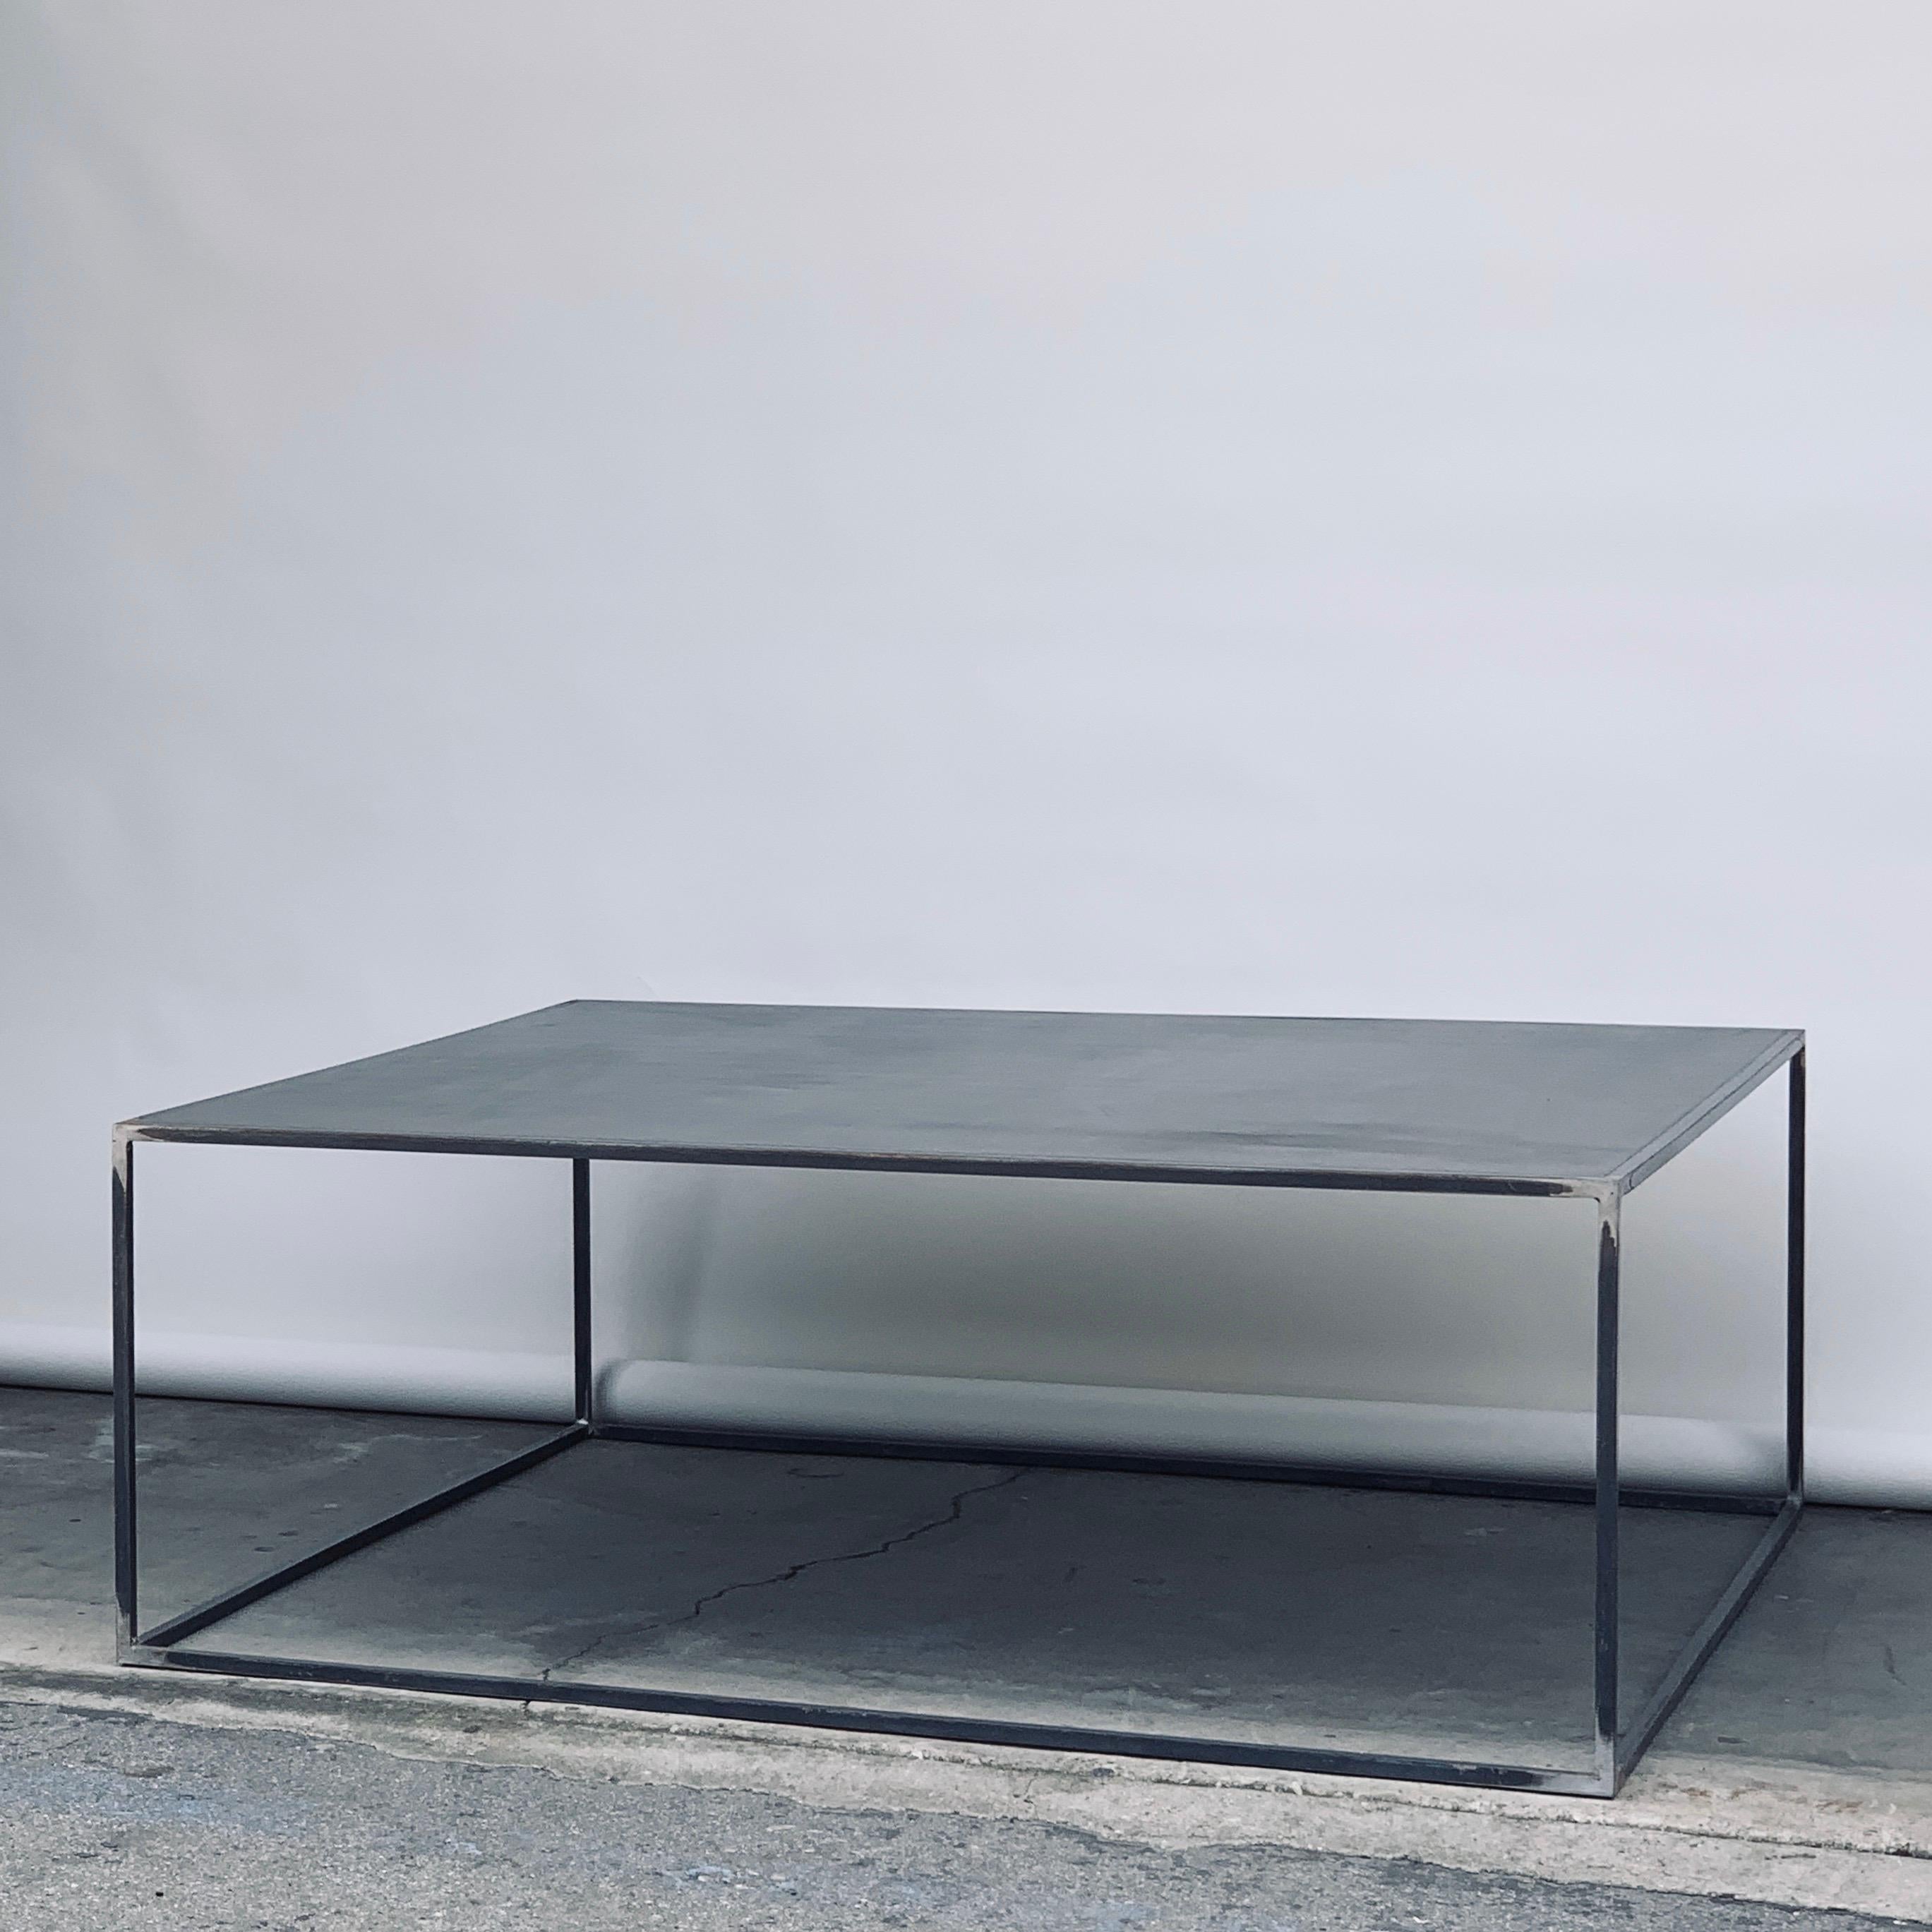 Complete Set of 'Filiforme' Minimalist Patinated Steel Living Room Tables In Excellent Condition For Sale In Los Angeles, CA